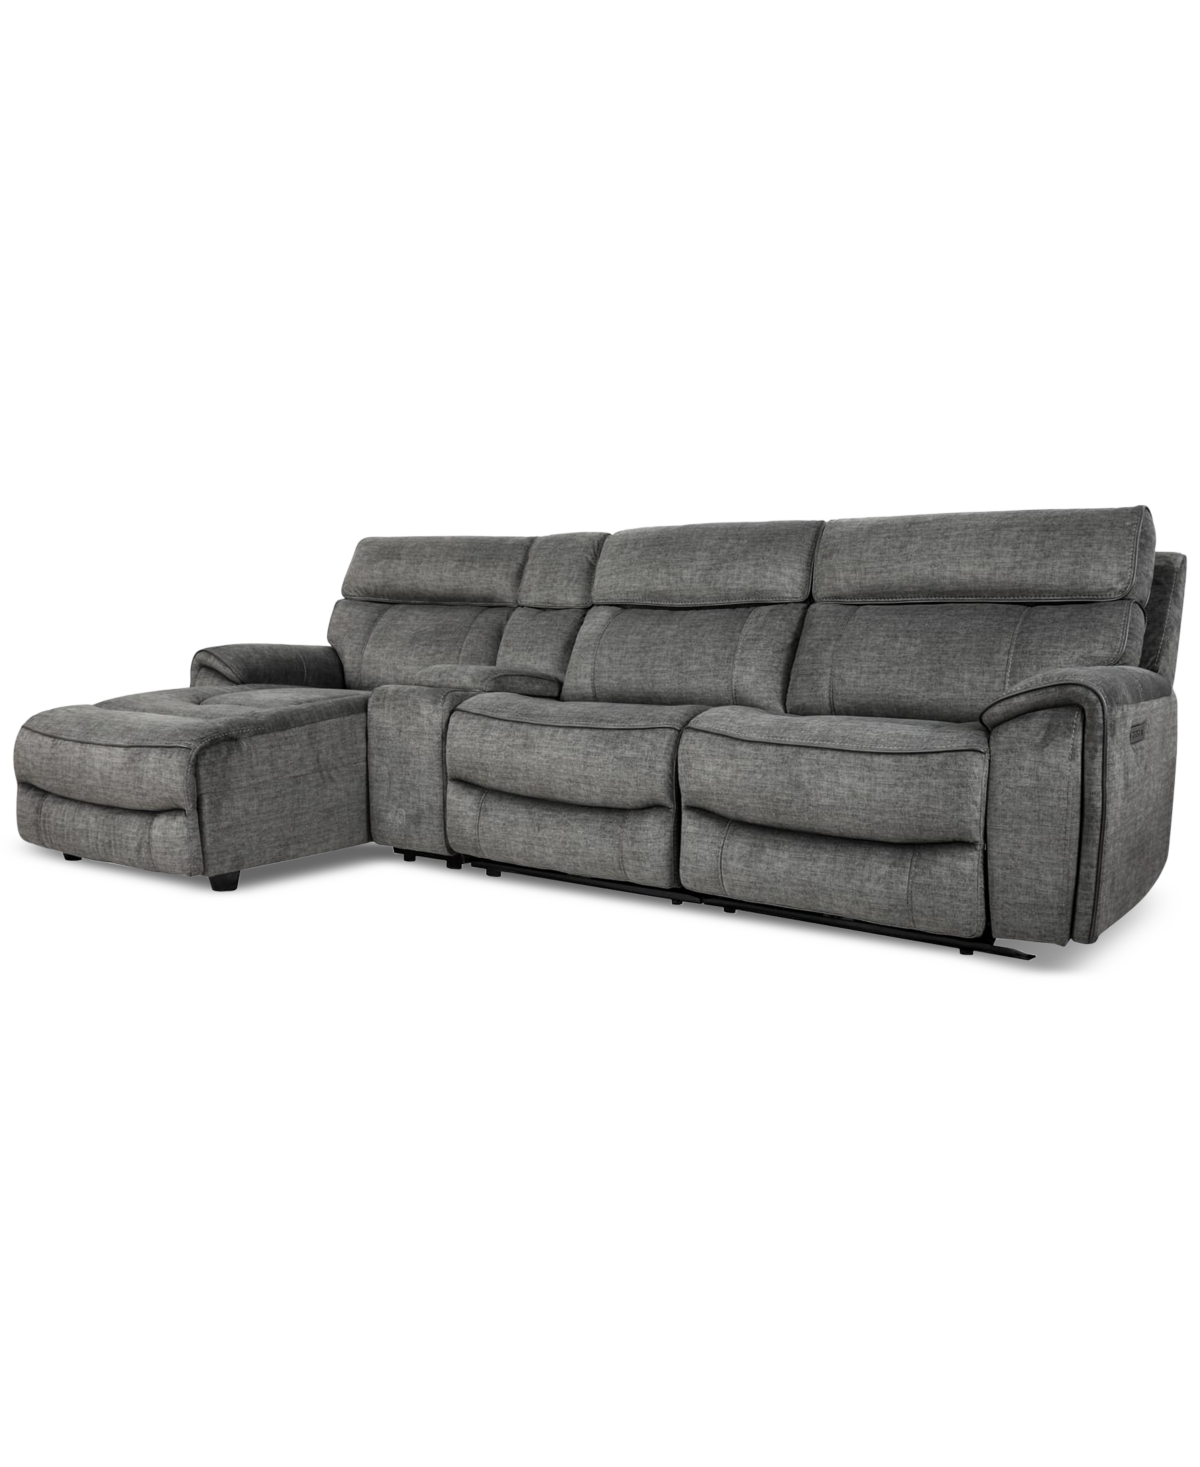 Furniture Hutchenson 4-pc. Fabric Chaise Sectional With 2 Power Recliners, Power Headrests And Console In Charcoal Moss